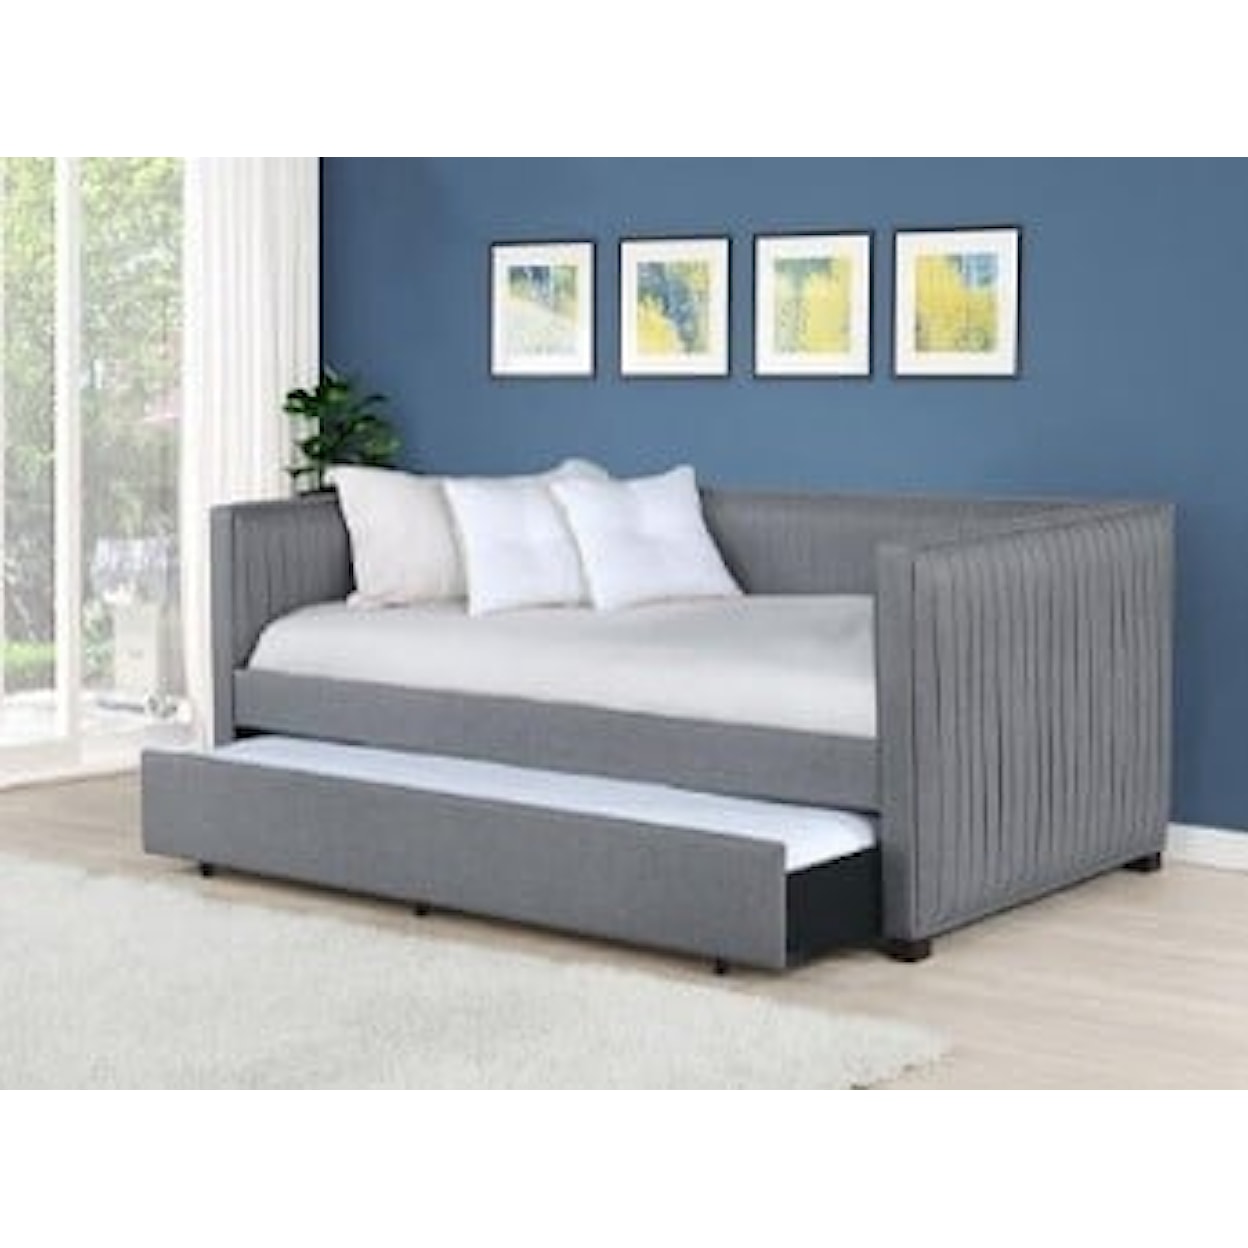 Acme Furniture Danyl Daybed (Twin)